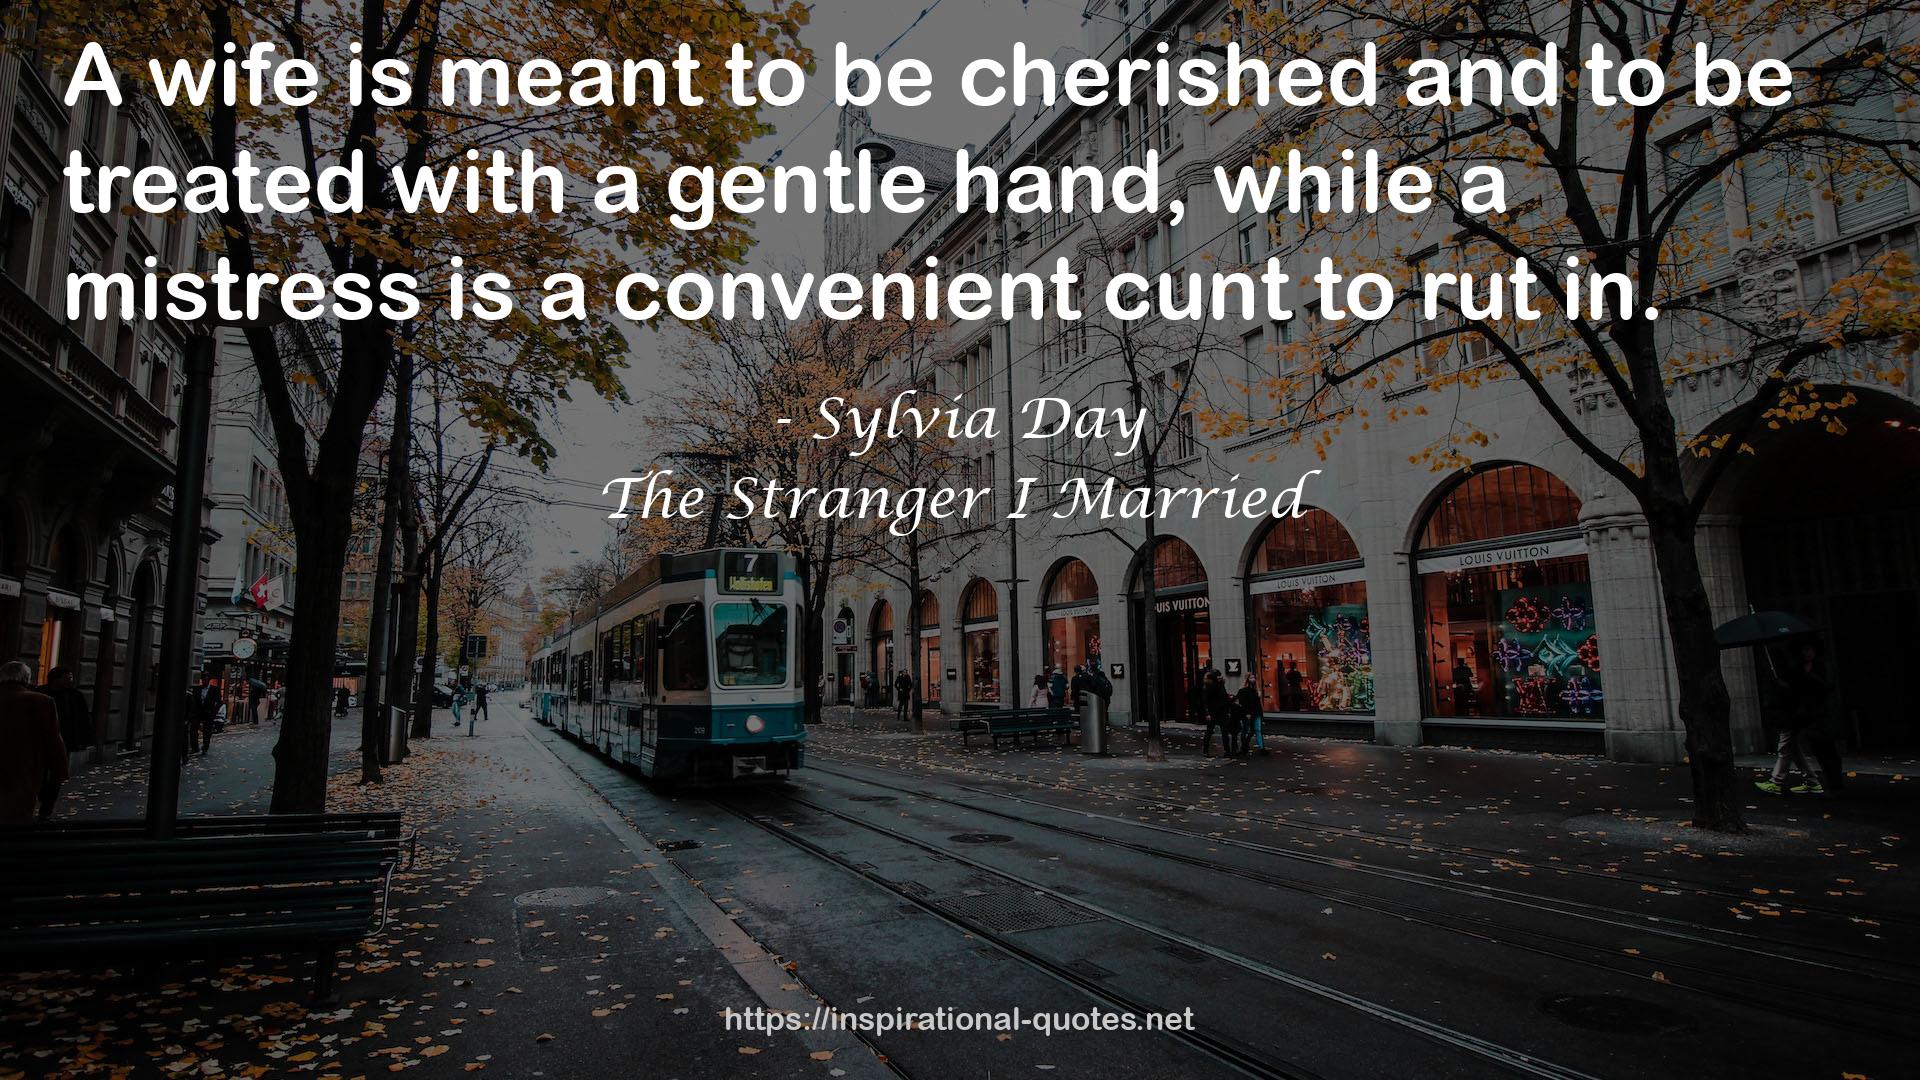 The Stranger I Married QUOTES